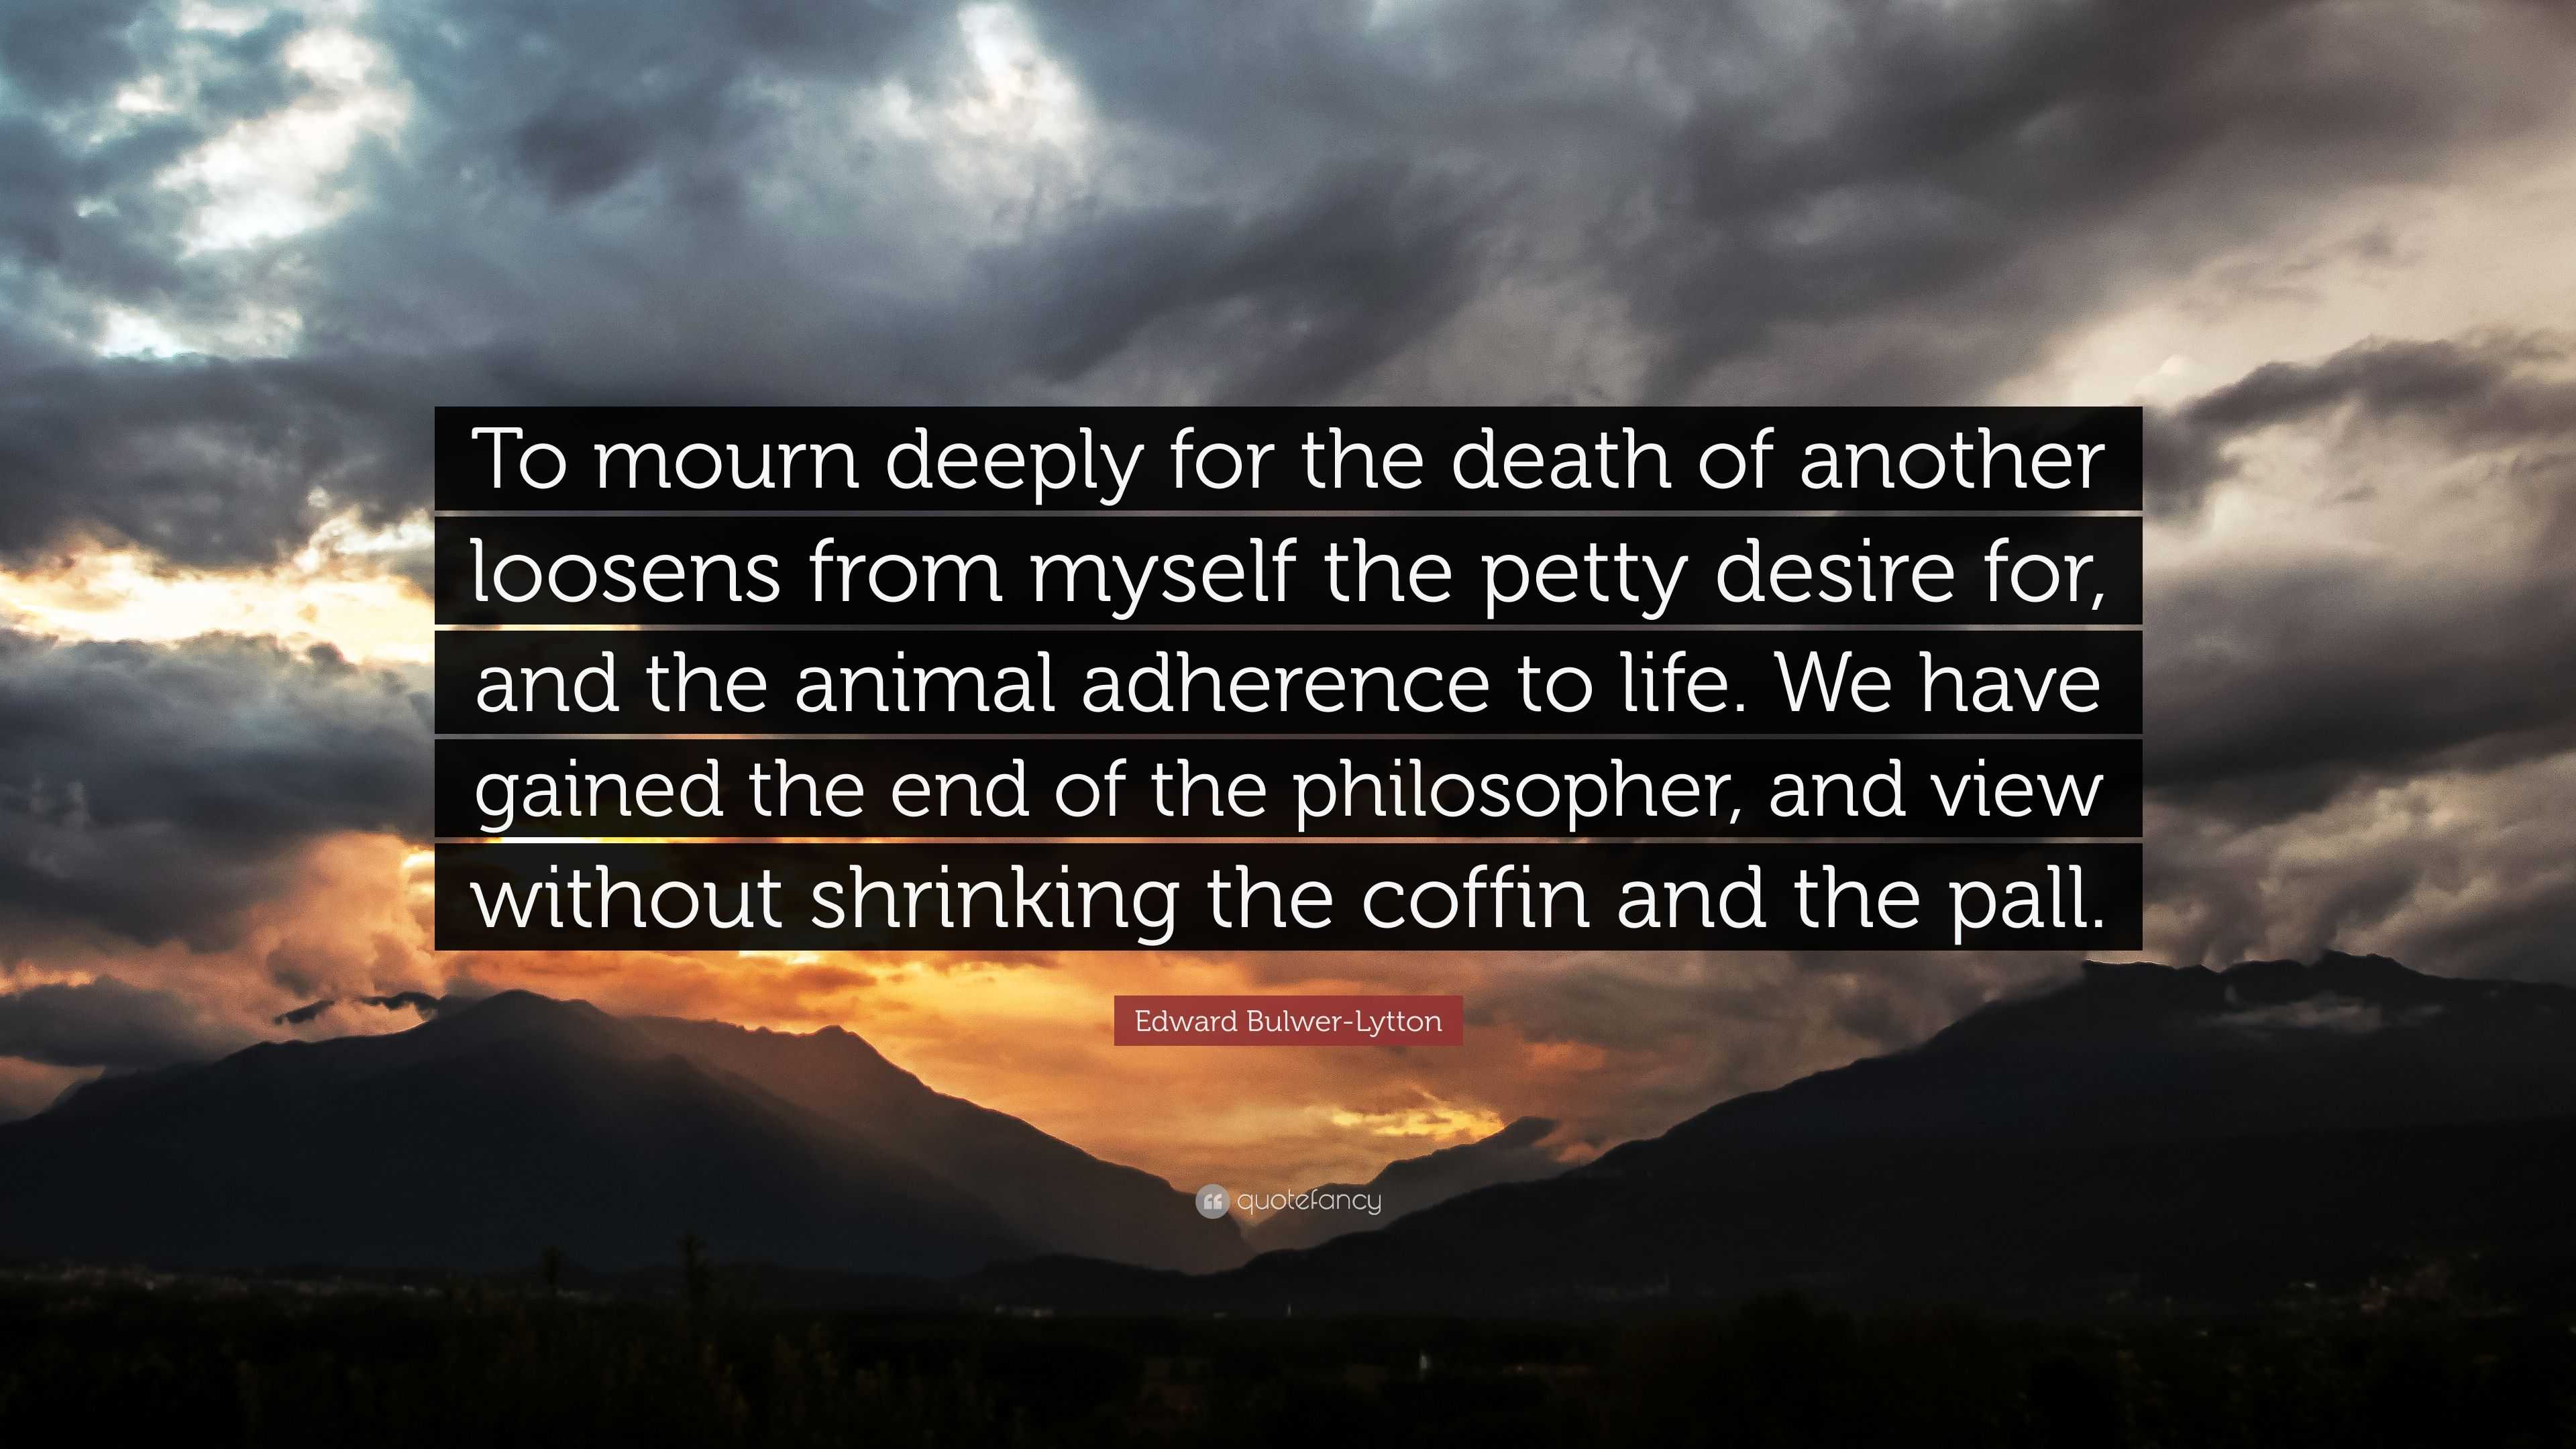 Edward Bulwer-Lytton Quote: “To mourn deeply for the death of another ...